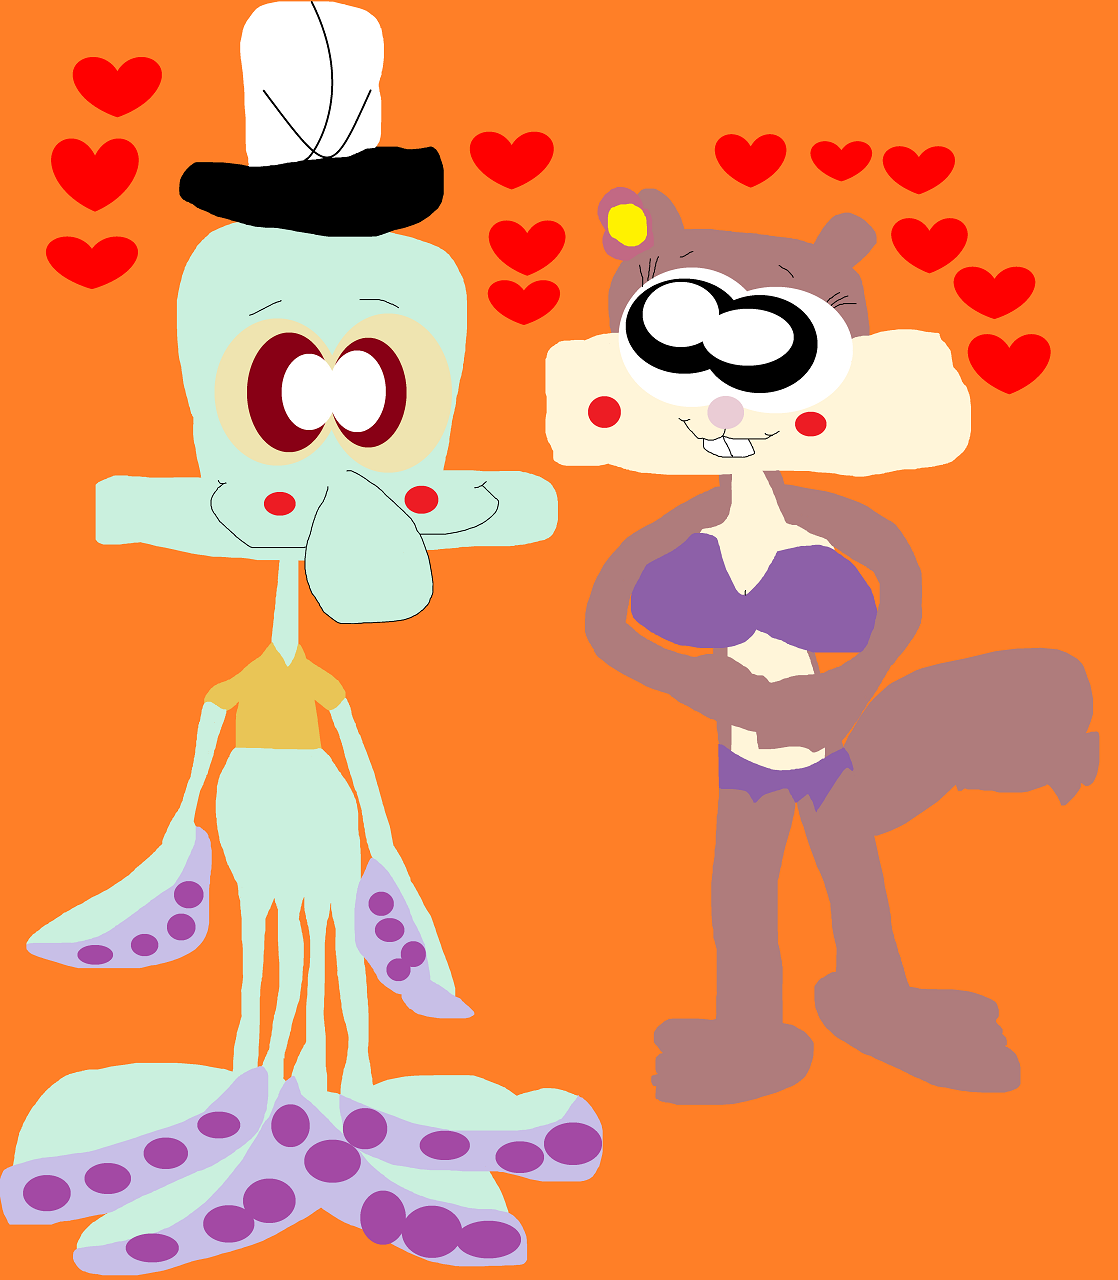 Squiddie And Sandy With Hearts Around Them by Falconlobo